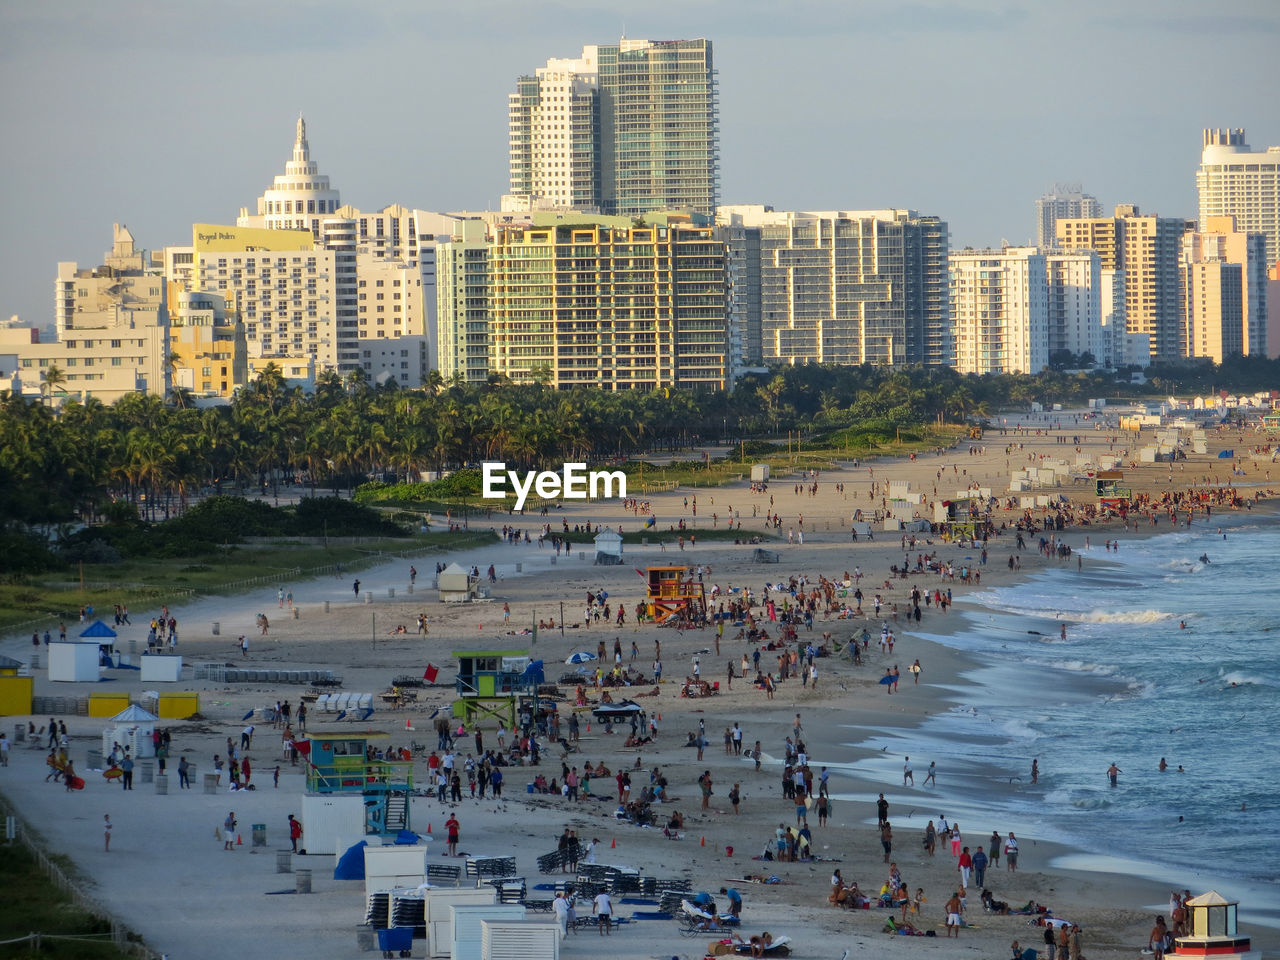 PANORAMIC VIEW OF PEOPLE AT BEACH AGAINST SKY